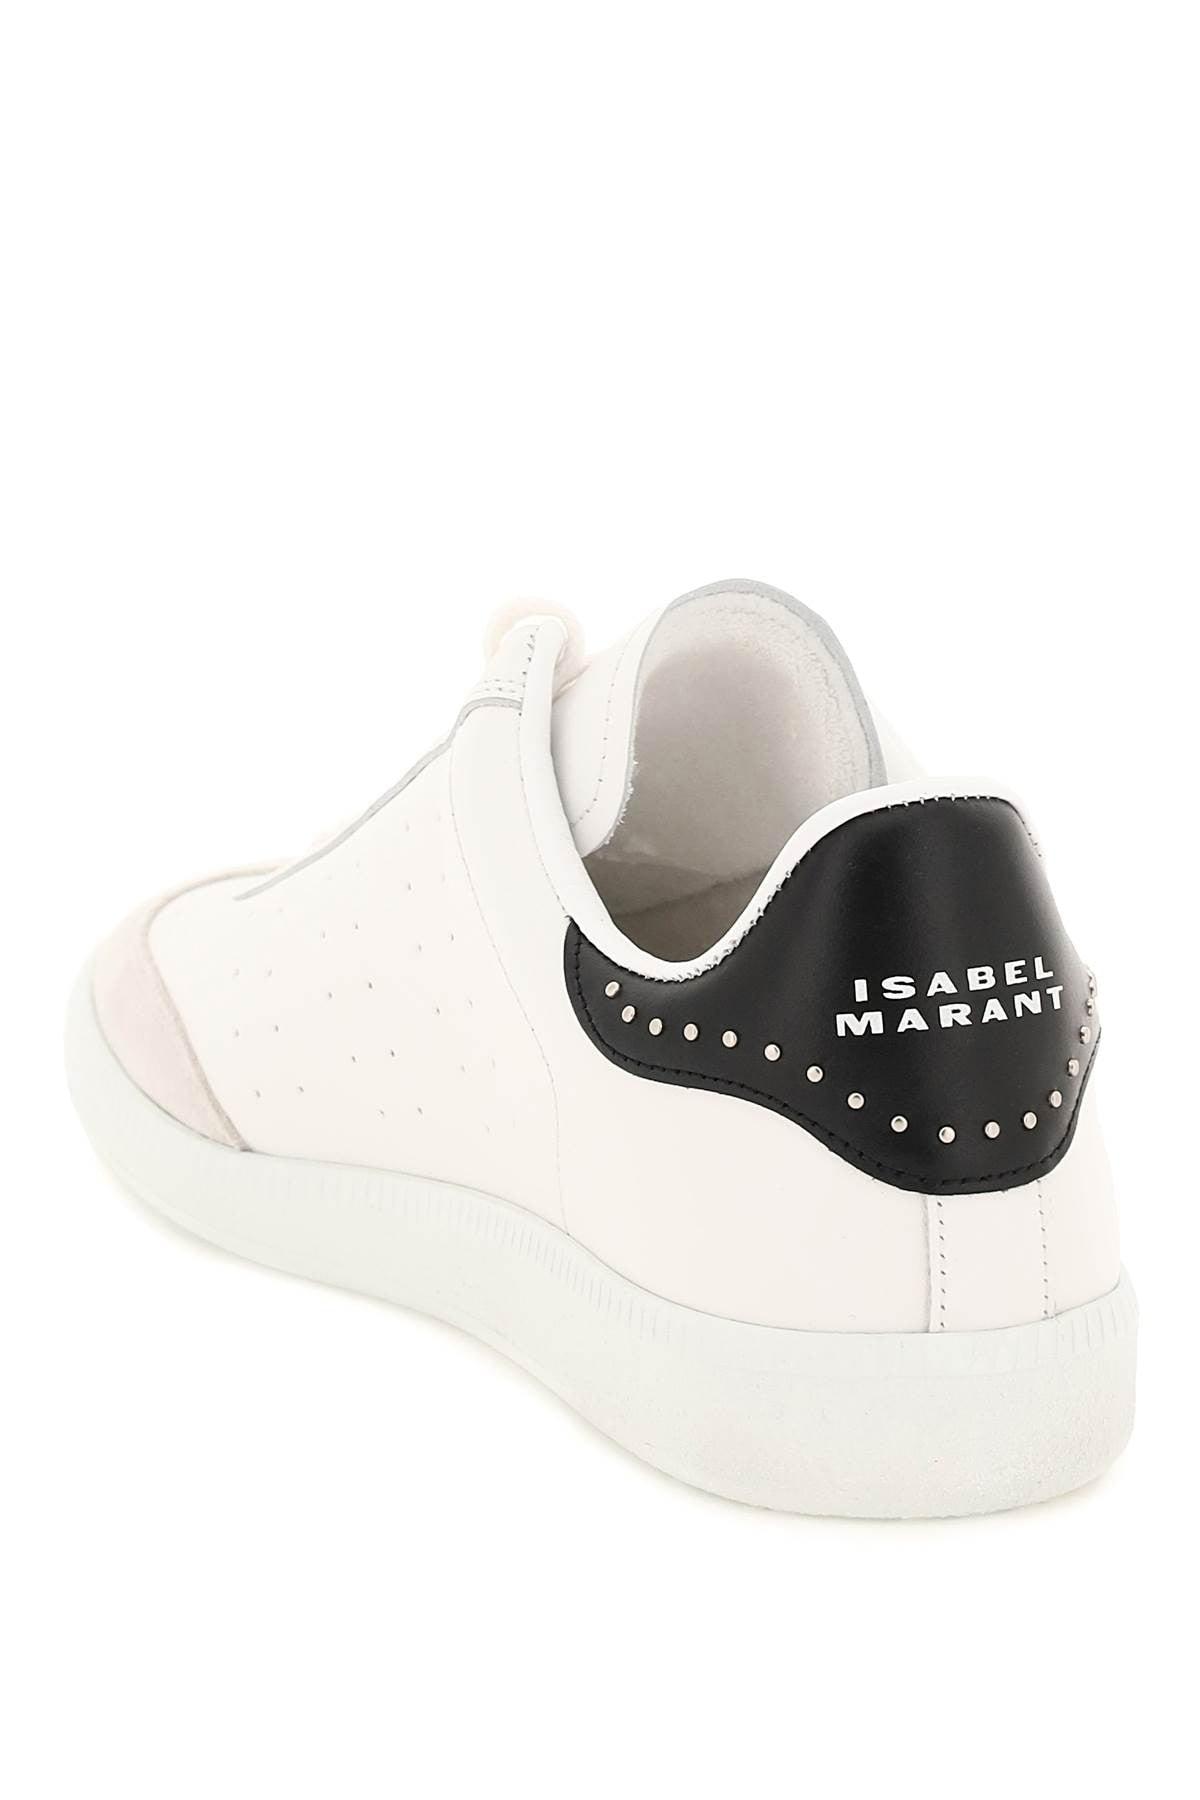 Isabel Marant Leather Sneakers in White | Lyst